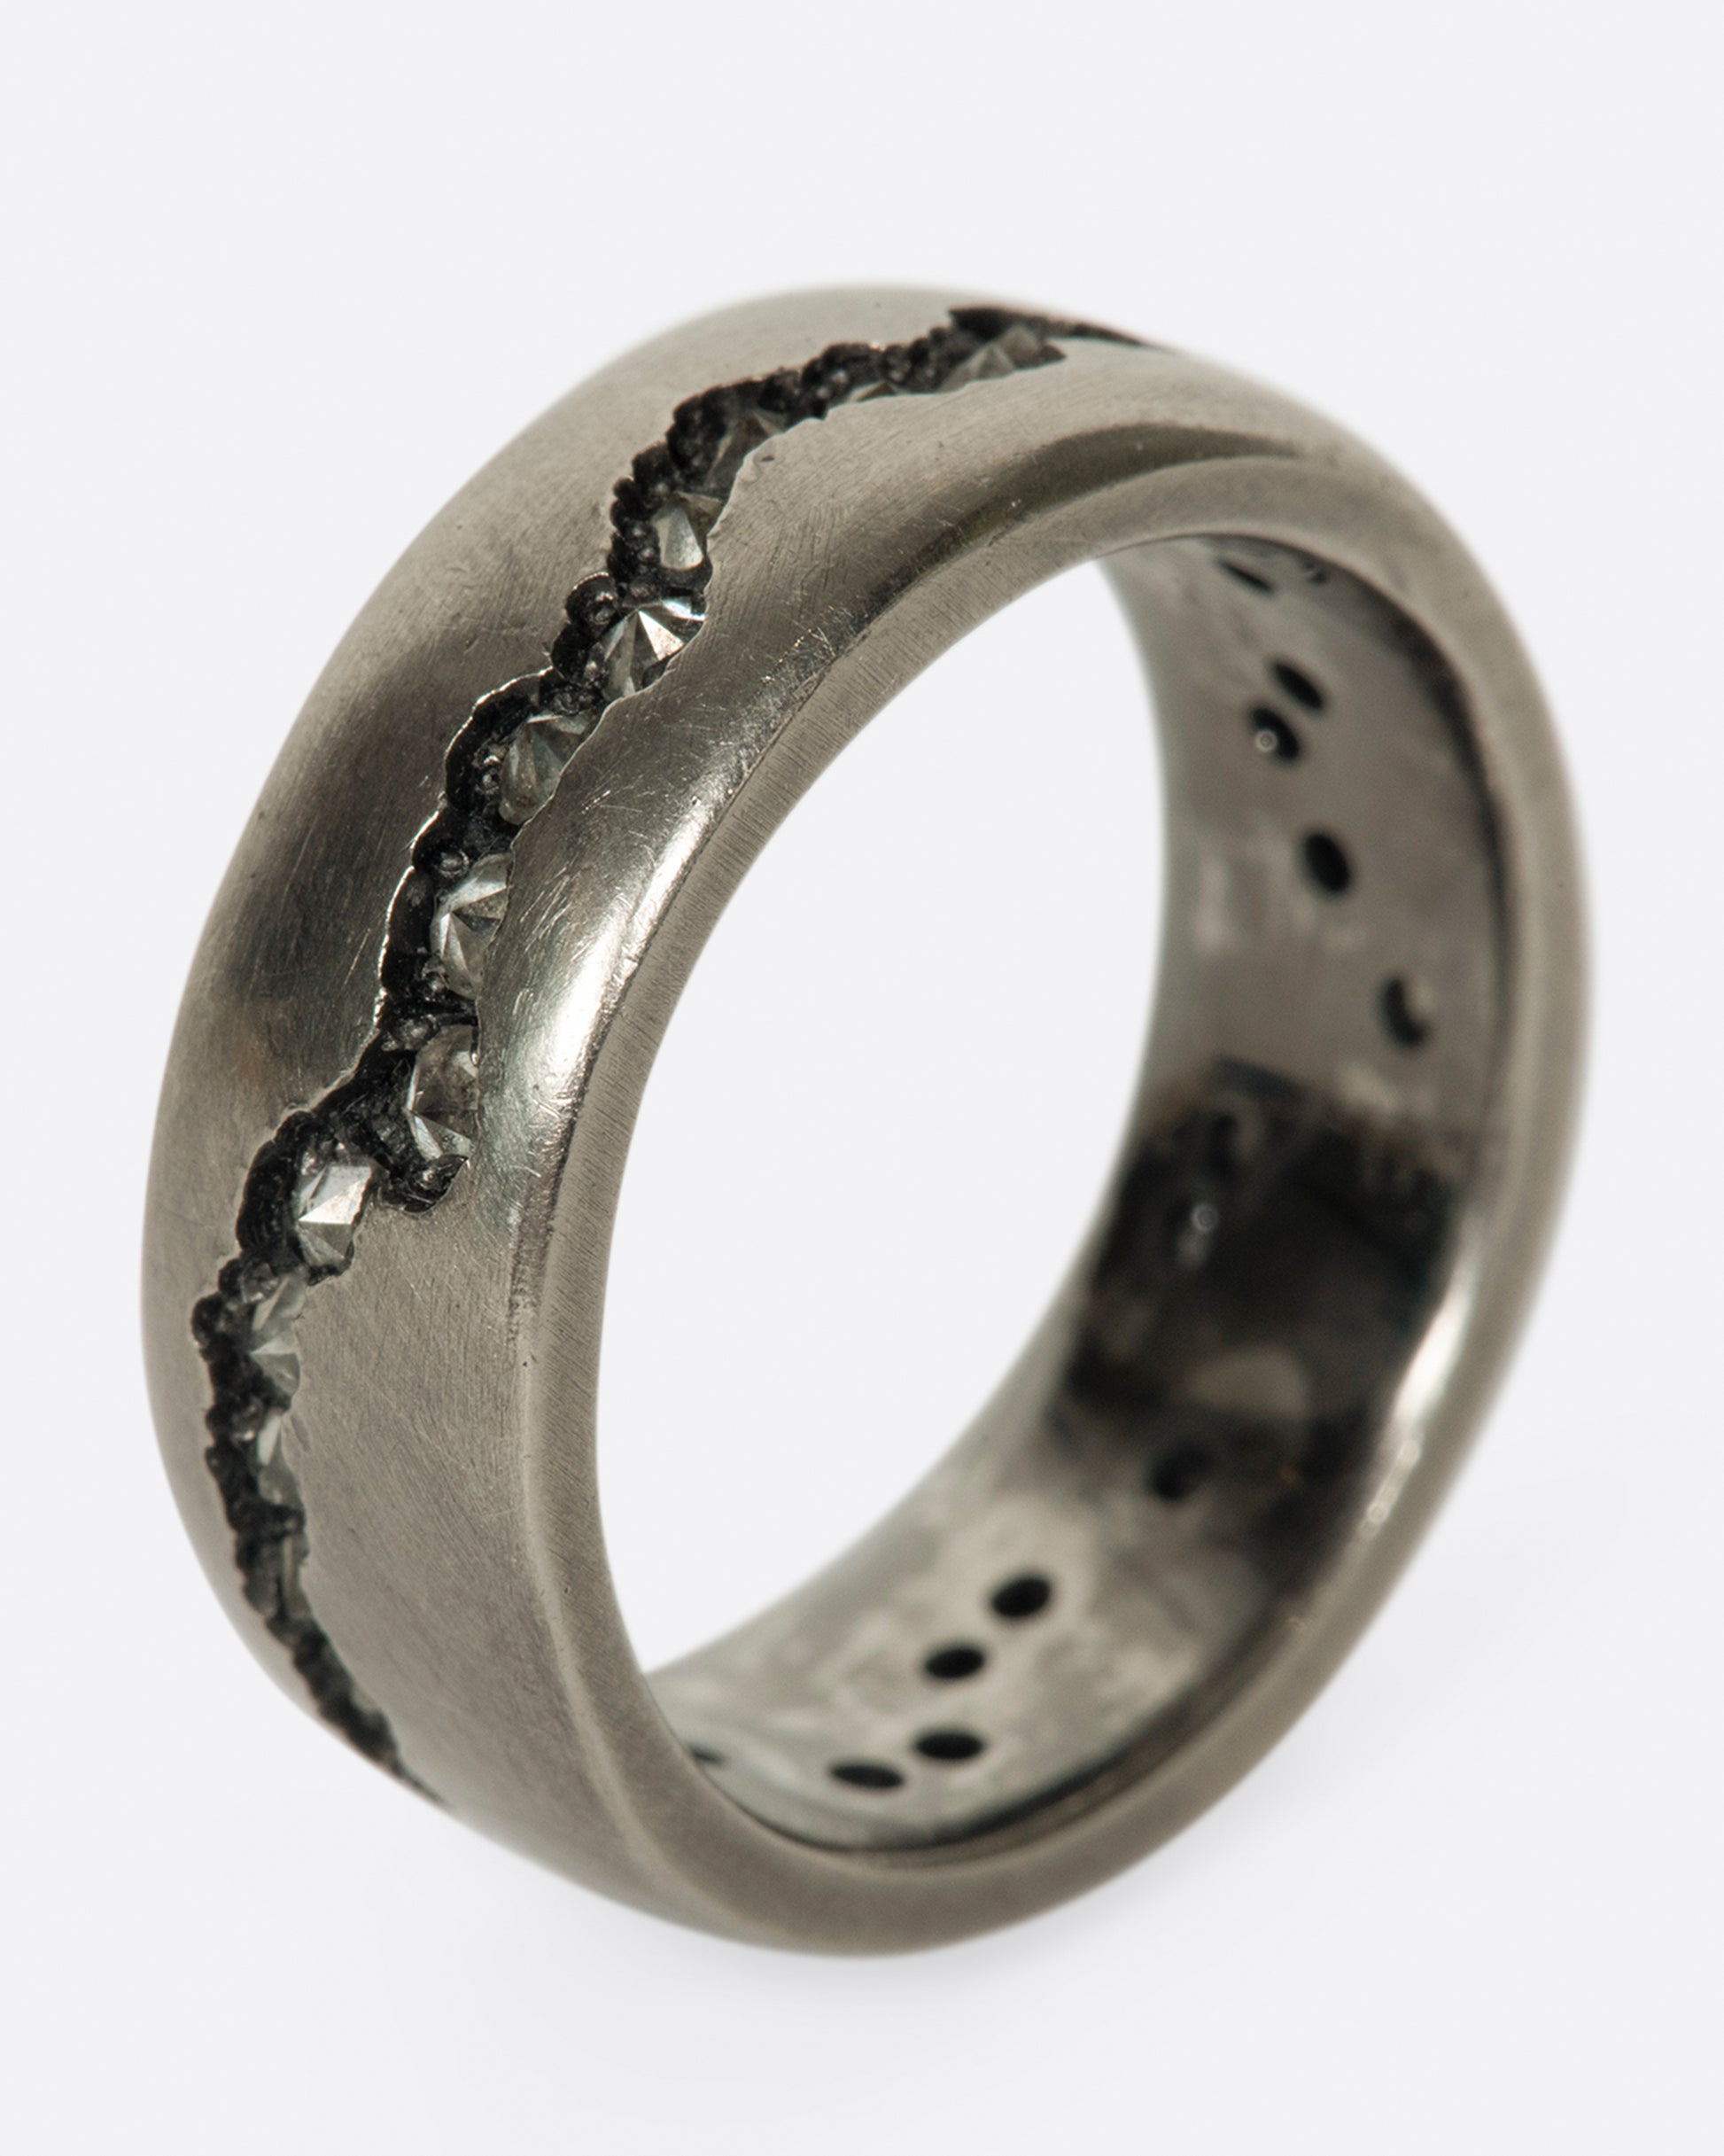 A wide palladium band with inverted diamonds set in a hand cut fissure through the center of the ring.